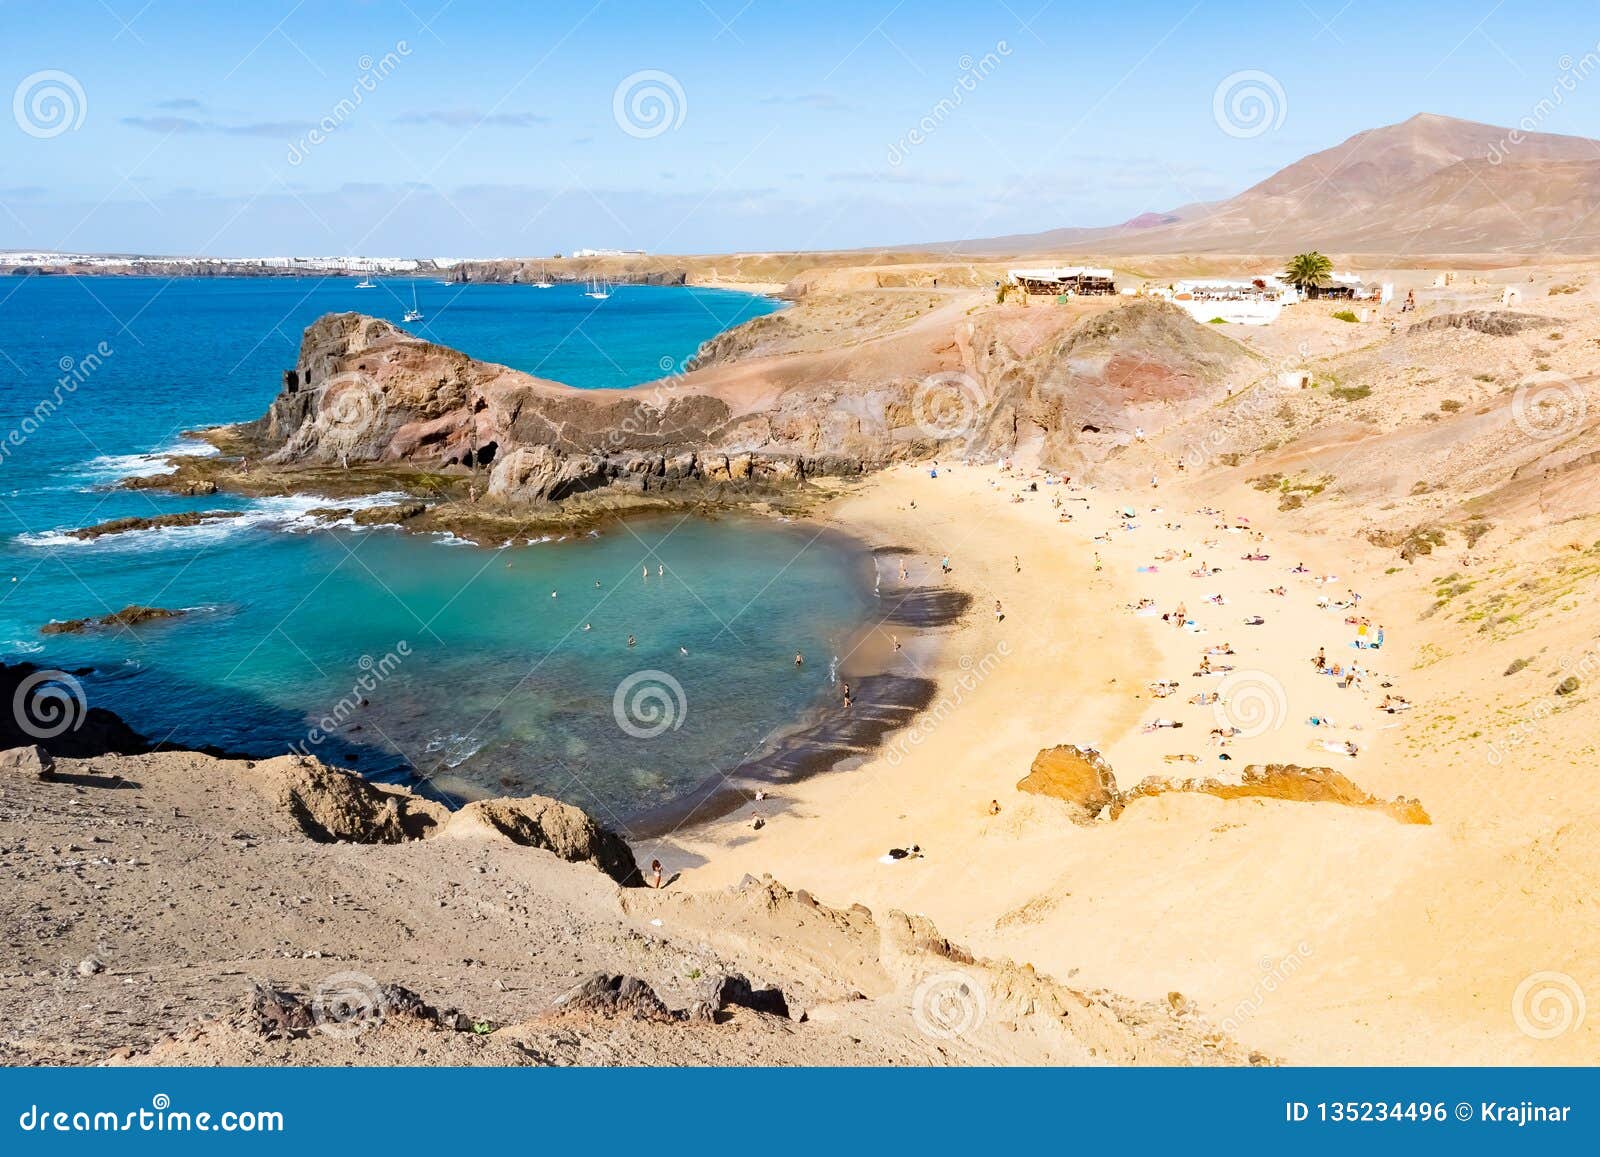 landscape with the famous papagayo beach on the lanzarote island in the canary islands, spain